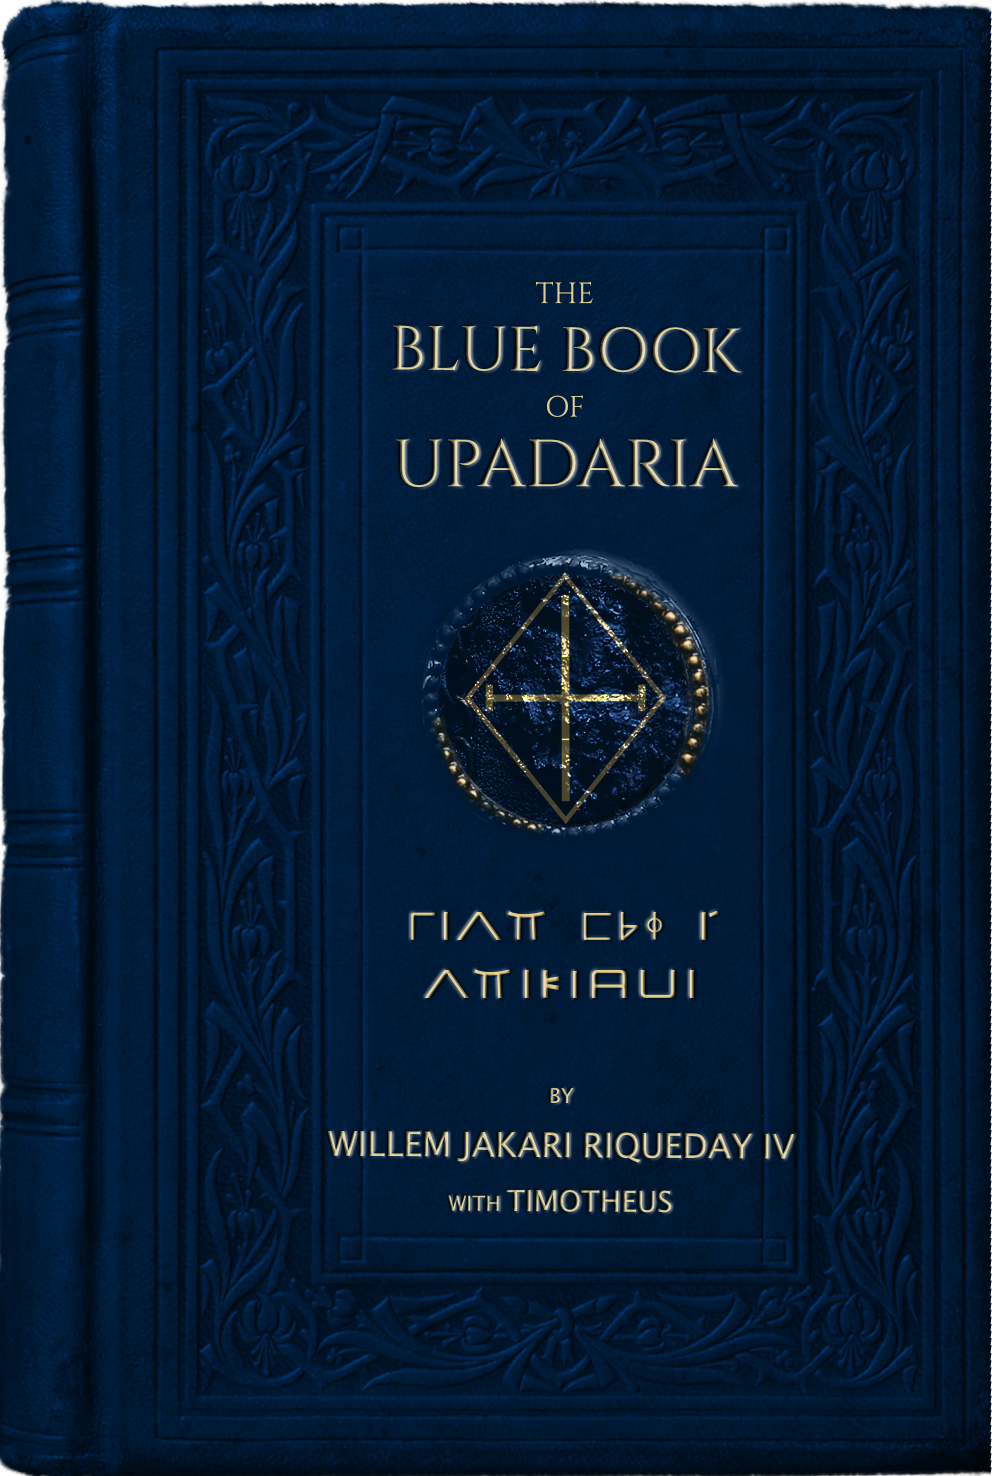 Cover of the Blue Book of Upadaria Image